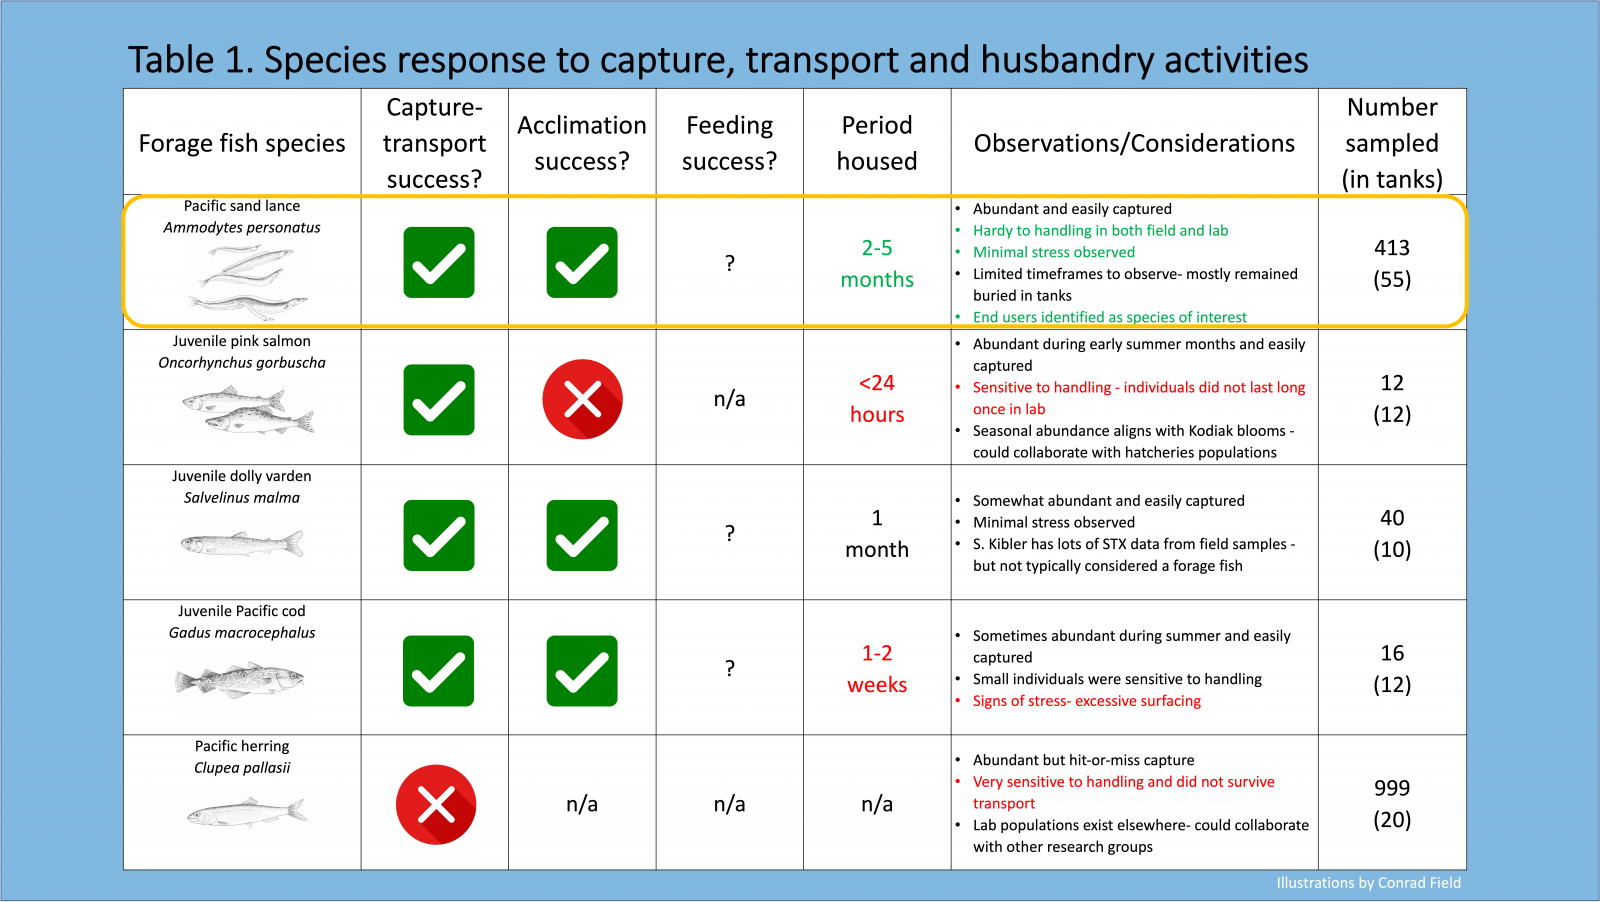 Table 1. Fish species response to capture transport and husbandry practices.